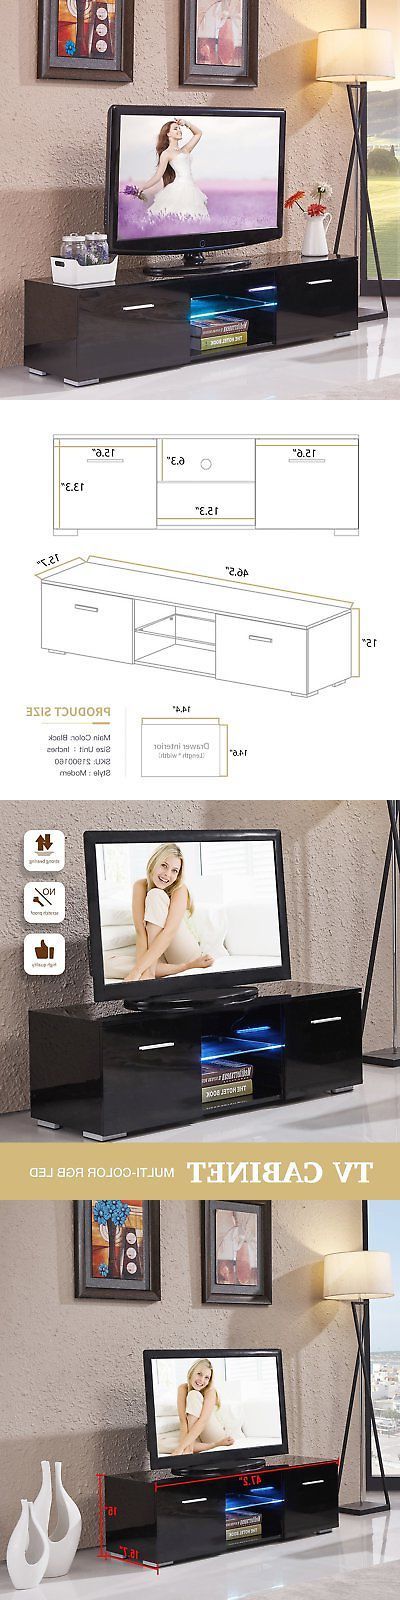 Entertainment Units Tv Stands 20488: 2 Drawers High Gloss Within Tv Stands With 2 Open Shelves 2 Drawers High Gloss Tv Unis (Gallery 15 of 20)